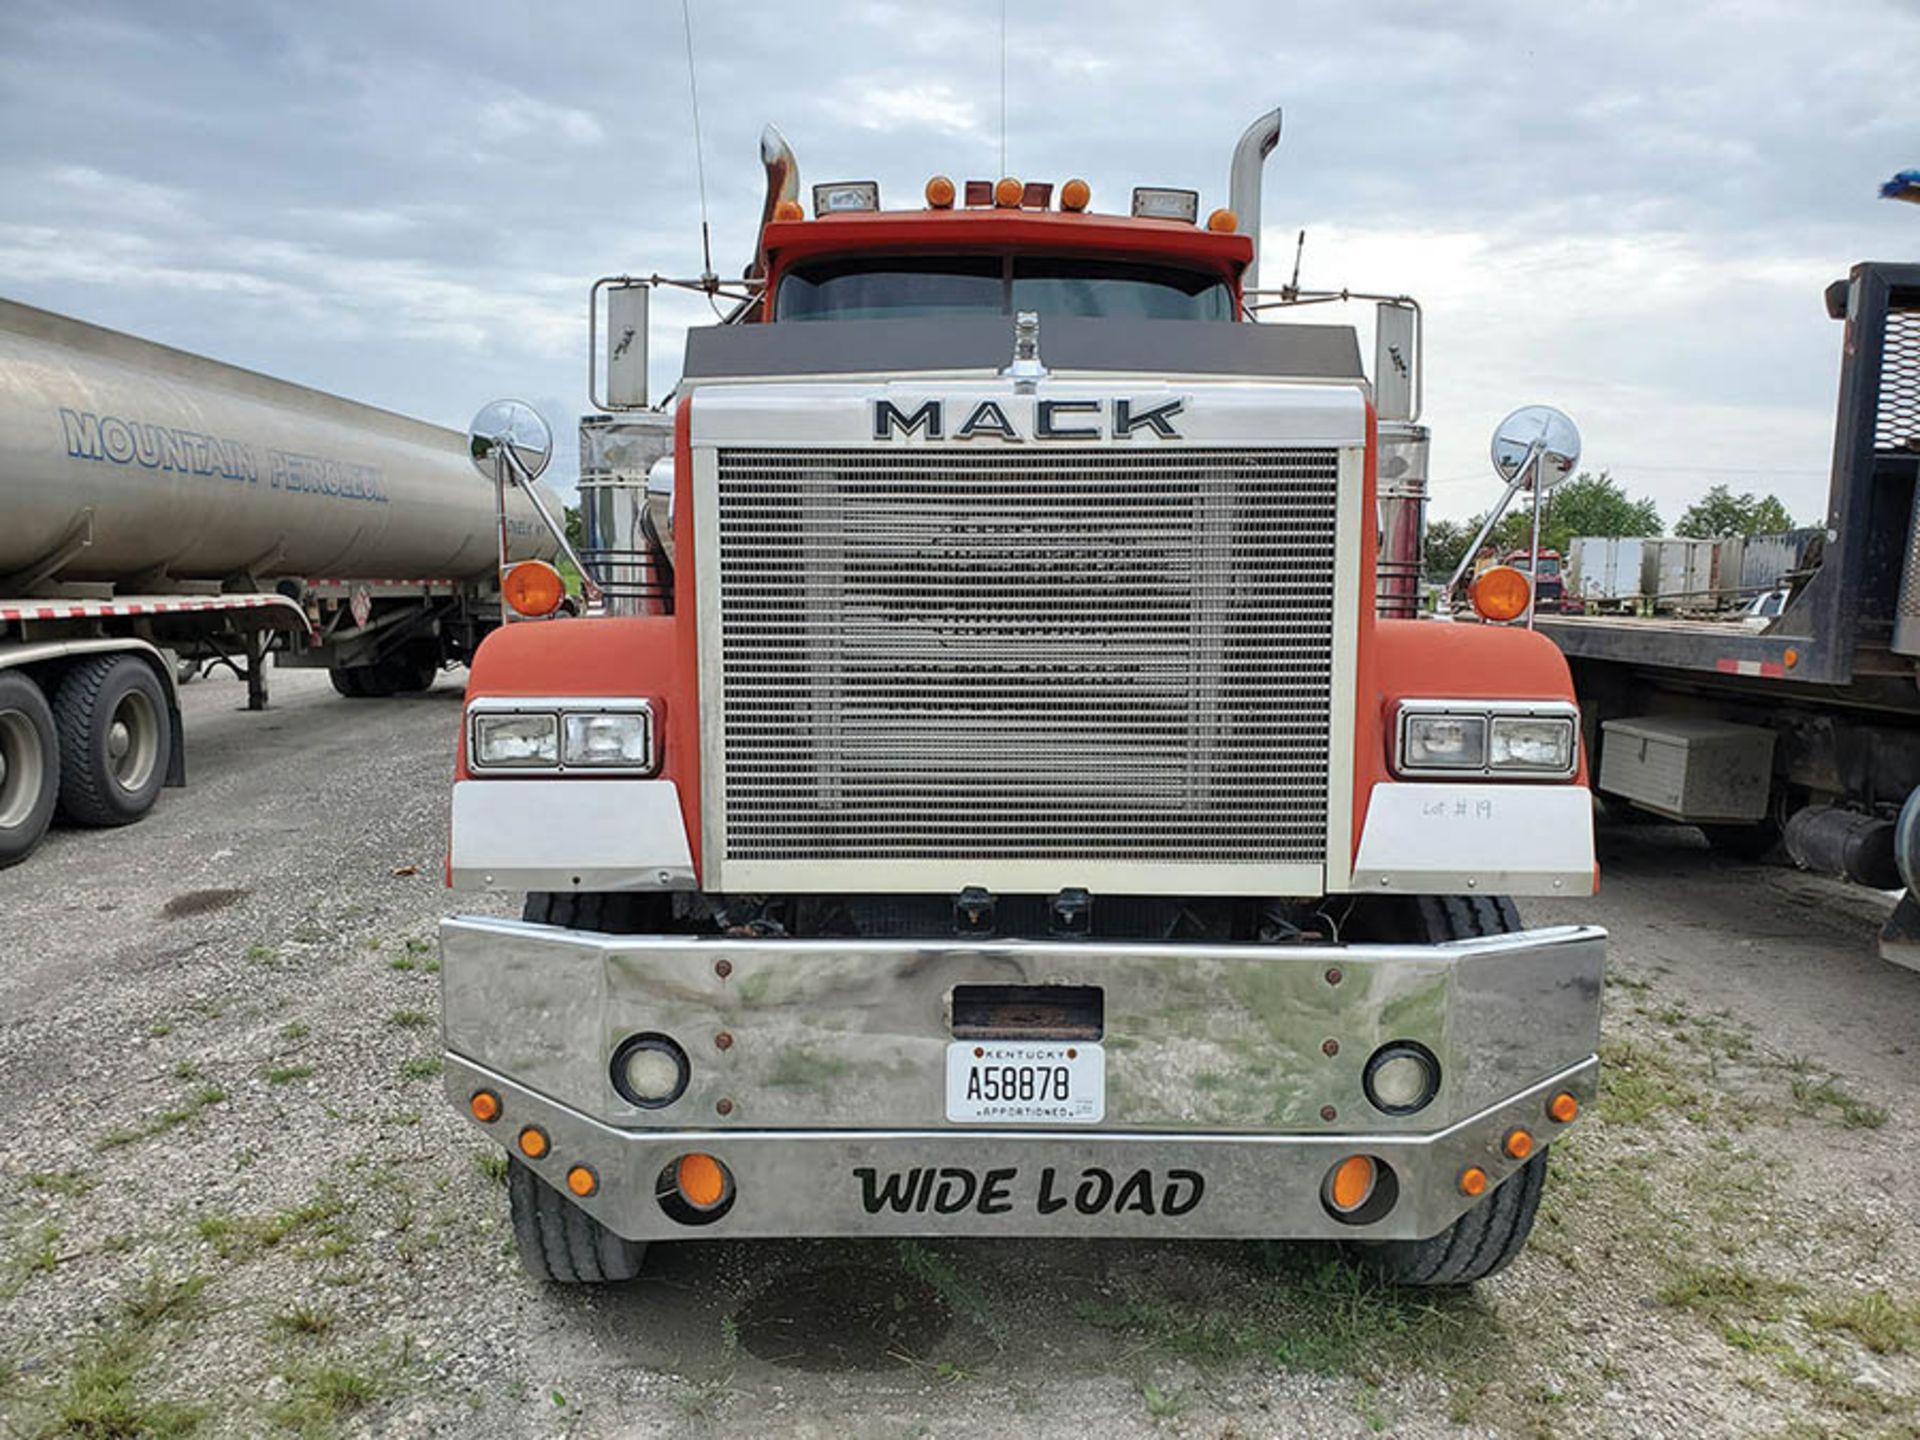 1991 MACK RW600 T/A DAY CAB TRACTOR, 10-SPEED TRANS WITH DEEP REDUCTION RANGE, WET LINES MACK INLINE - Image 4 of 14